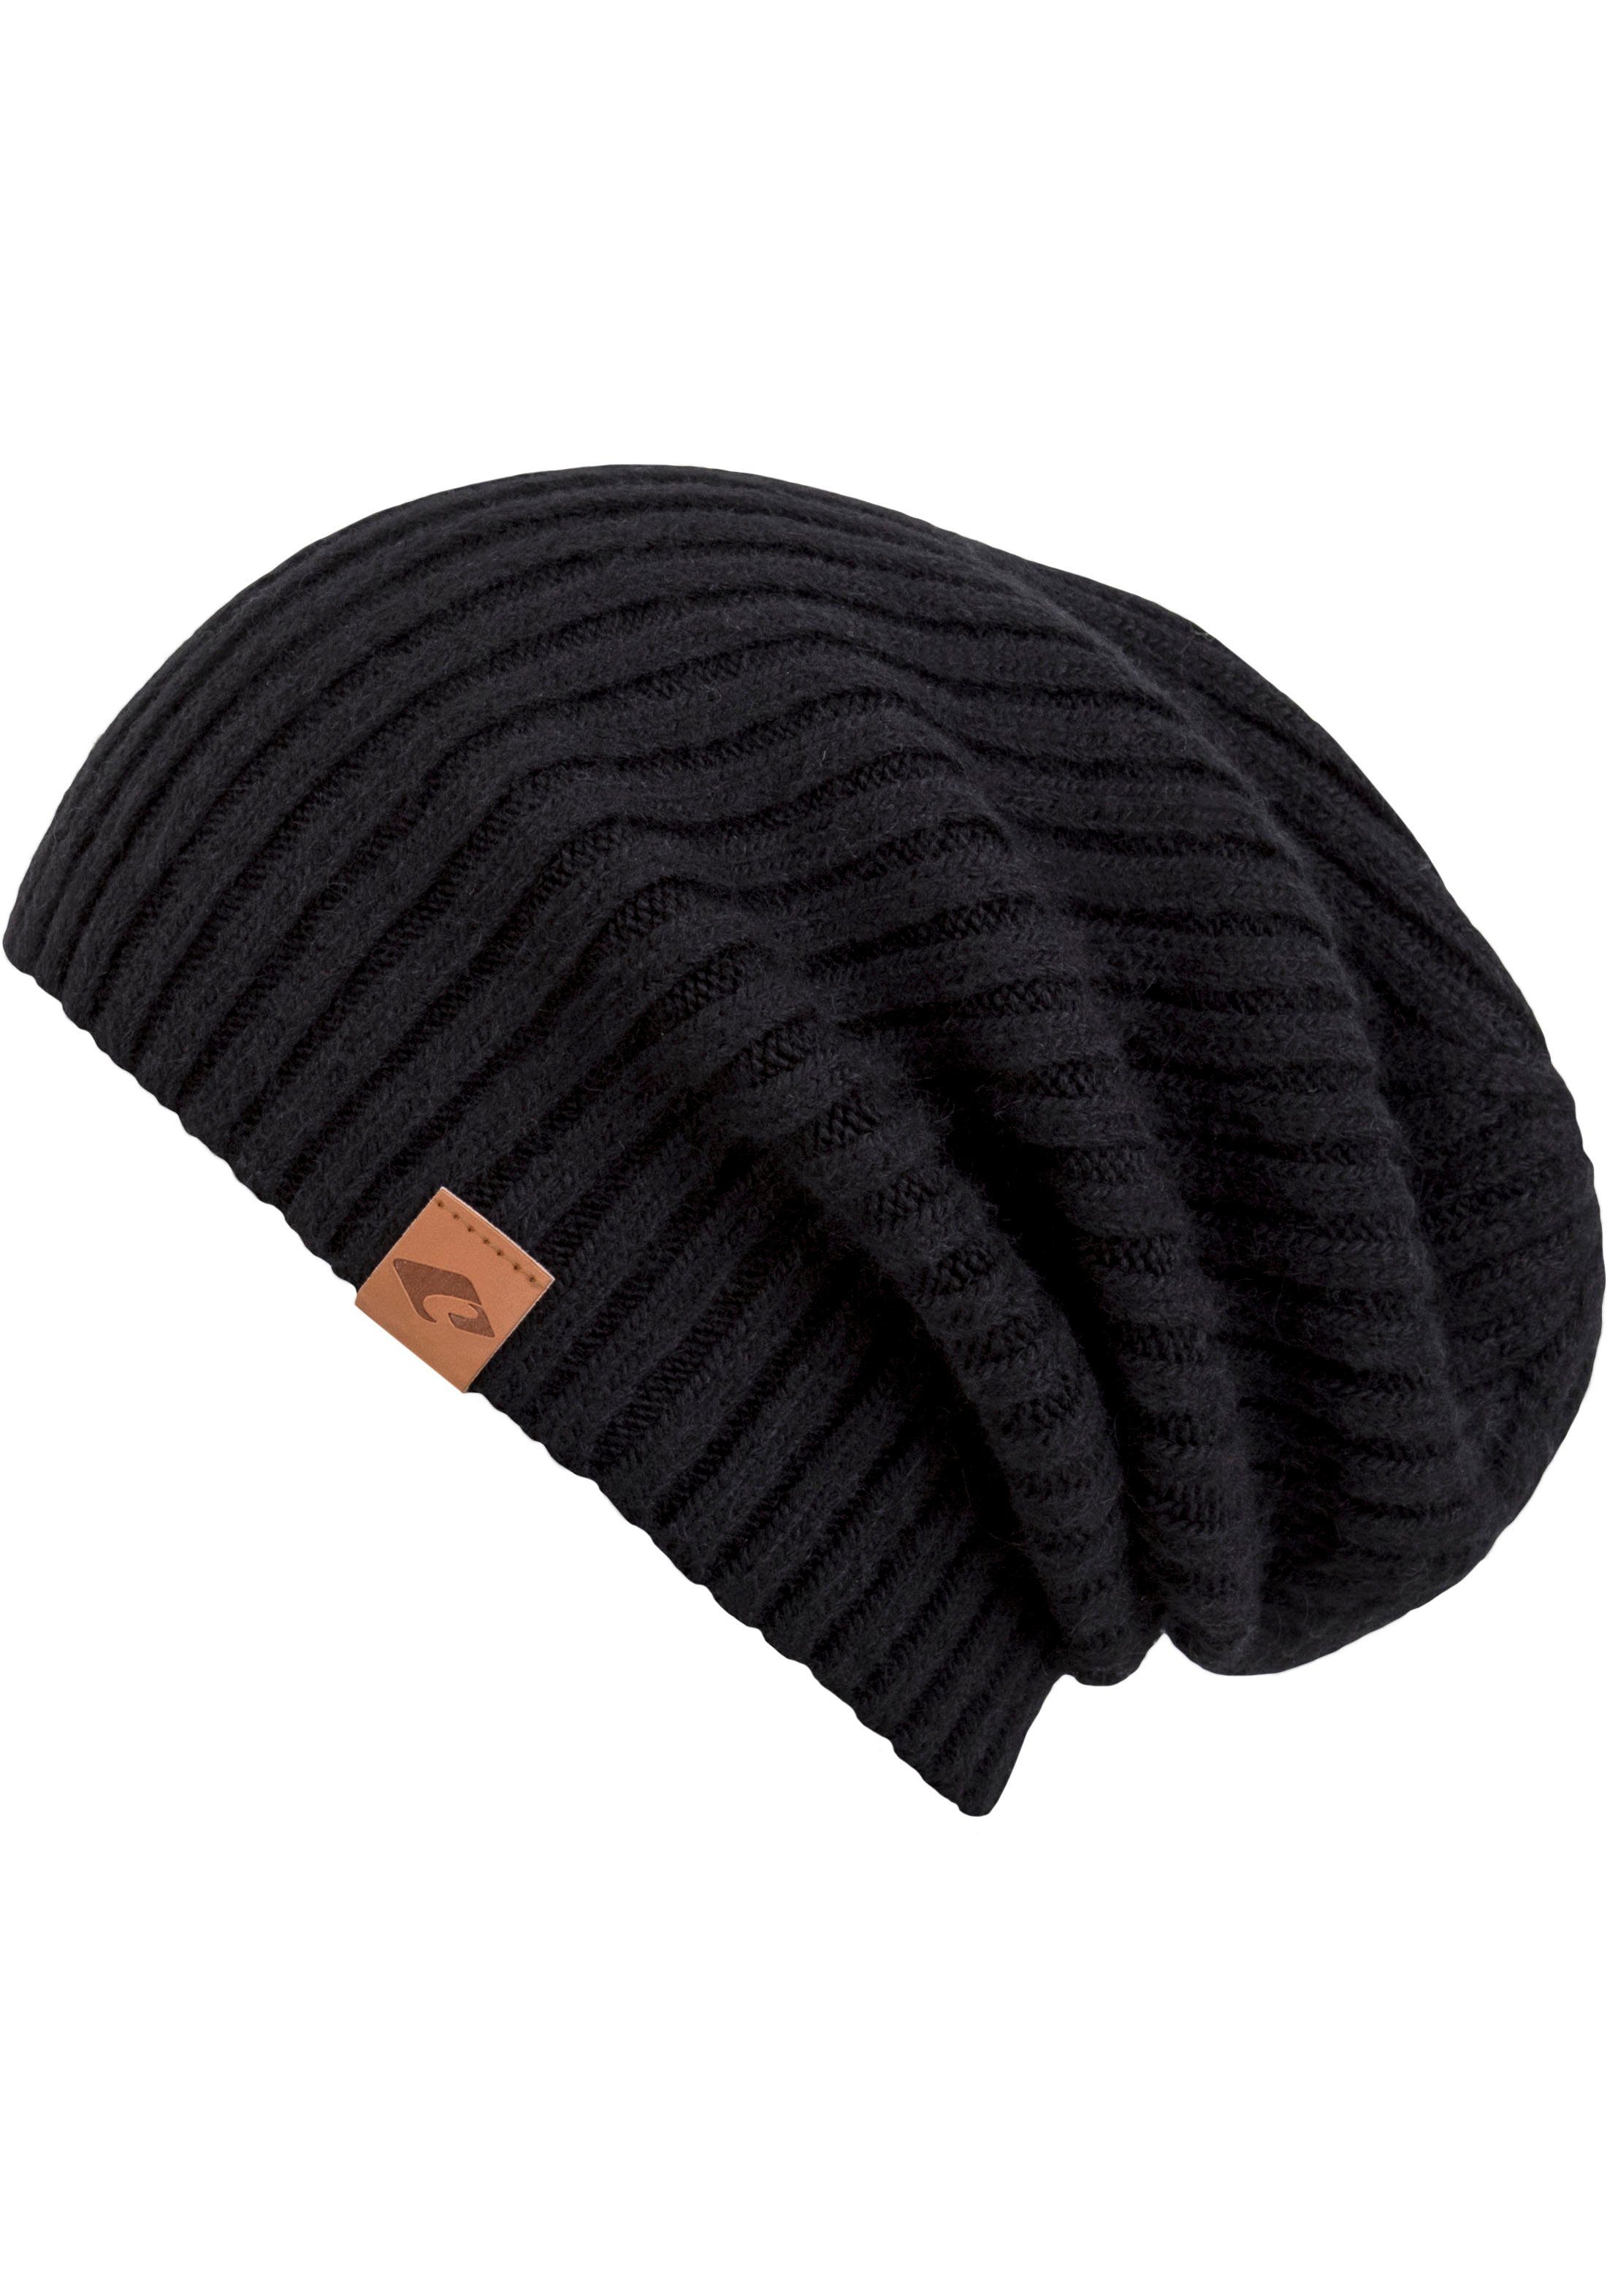 chillouts Beanie Justin Hat, One ( 58-62 flexibel ) Size cm ca